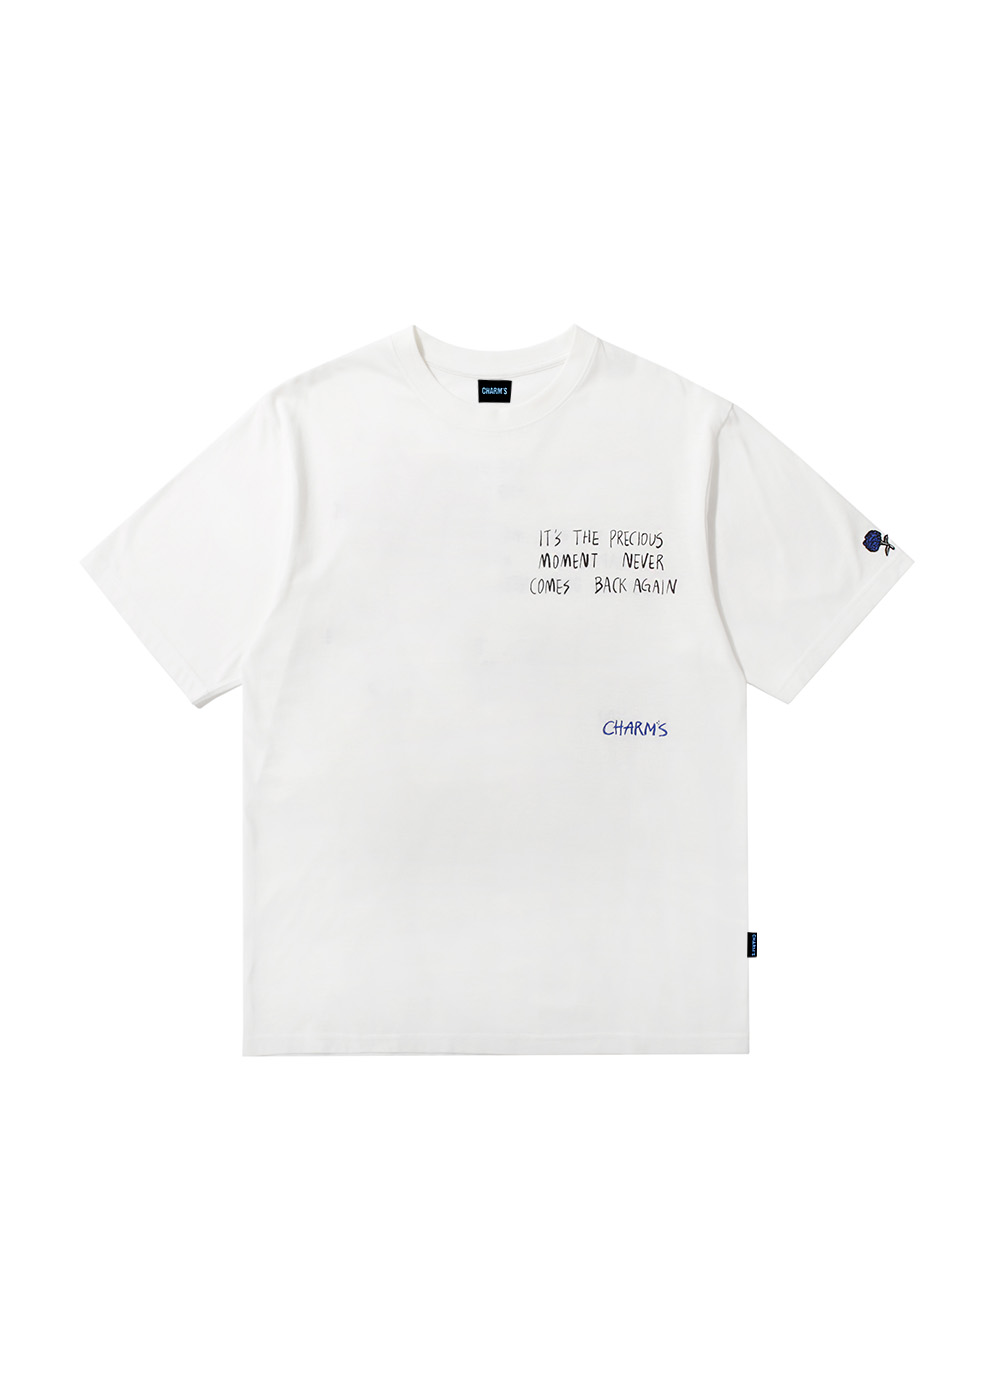 prestar Tomate Oceano 02/22 Reservation shipping[ CHARMS X ONG SEONG WU ] Handwritten T-shirt  White - 참스